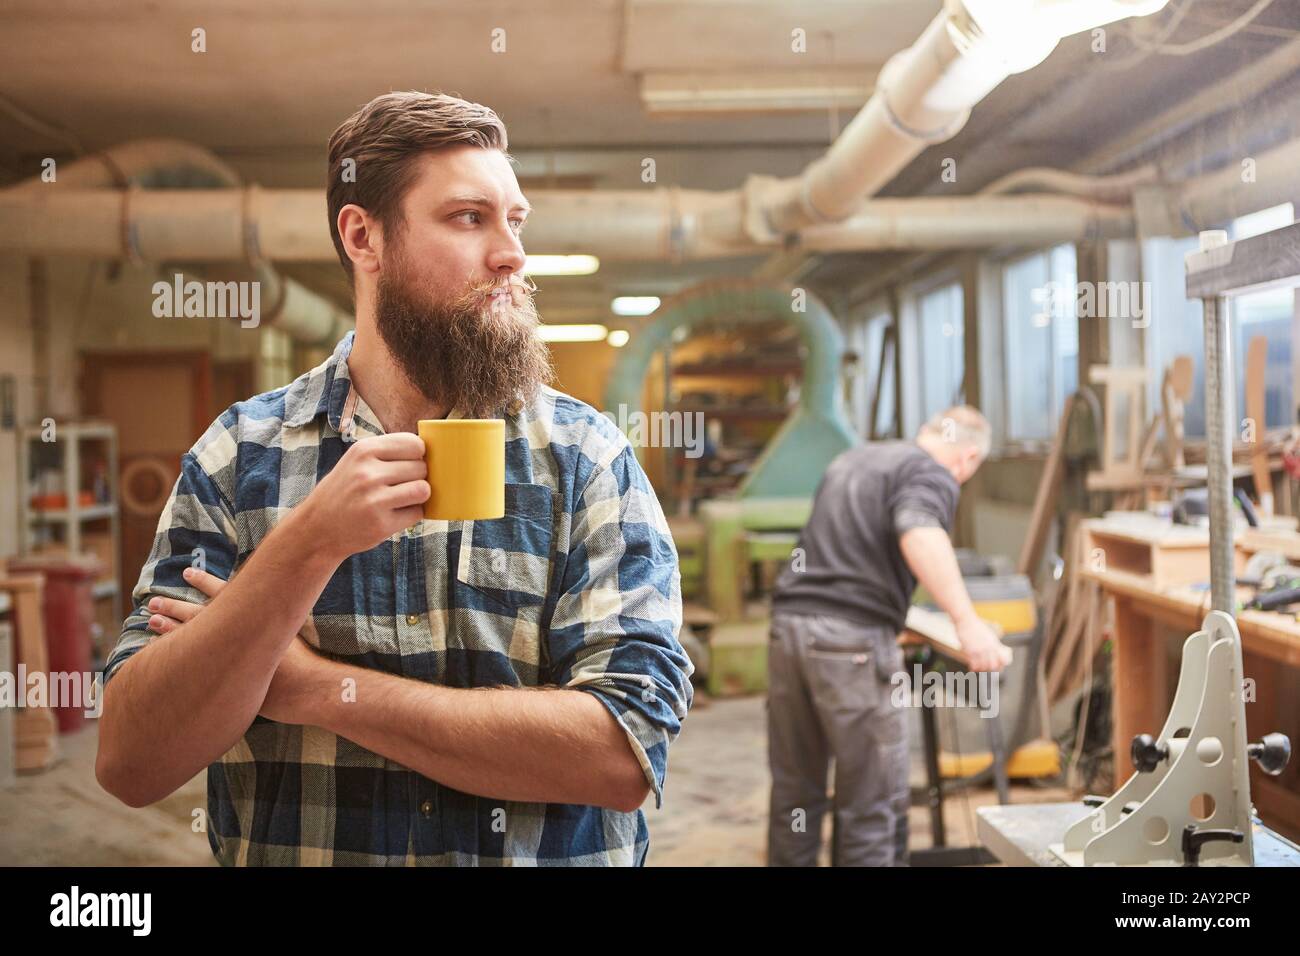 Carpenter with a beard drinks a cup of coffee in the joinery during a break Stock Photo